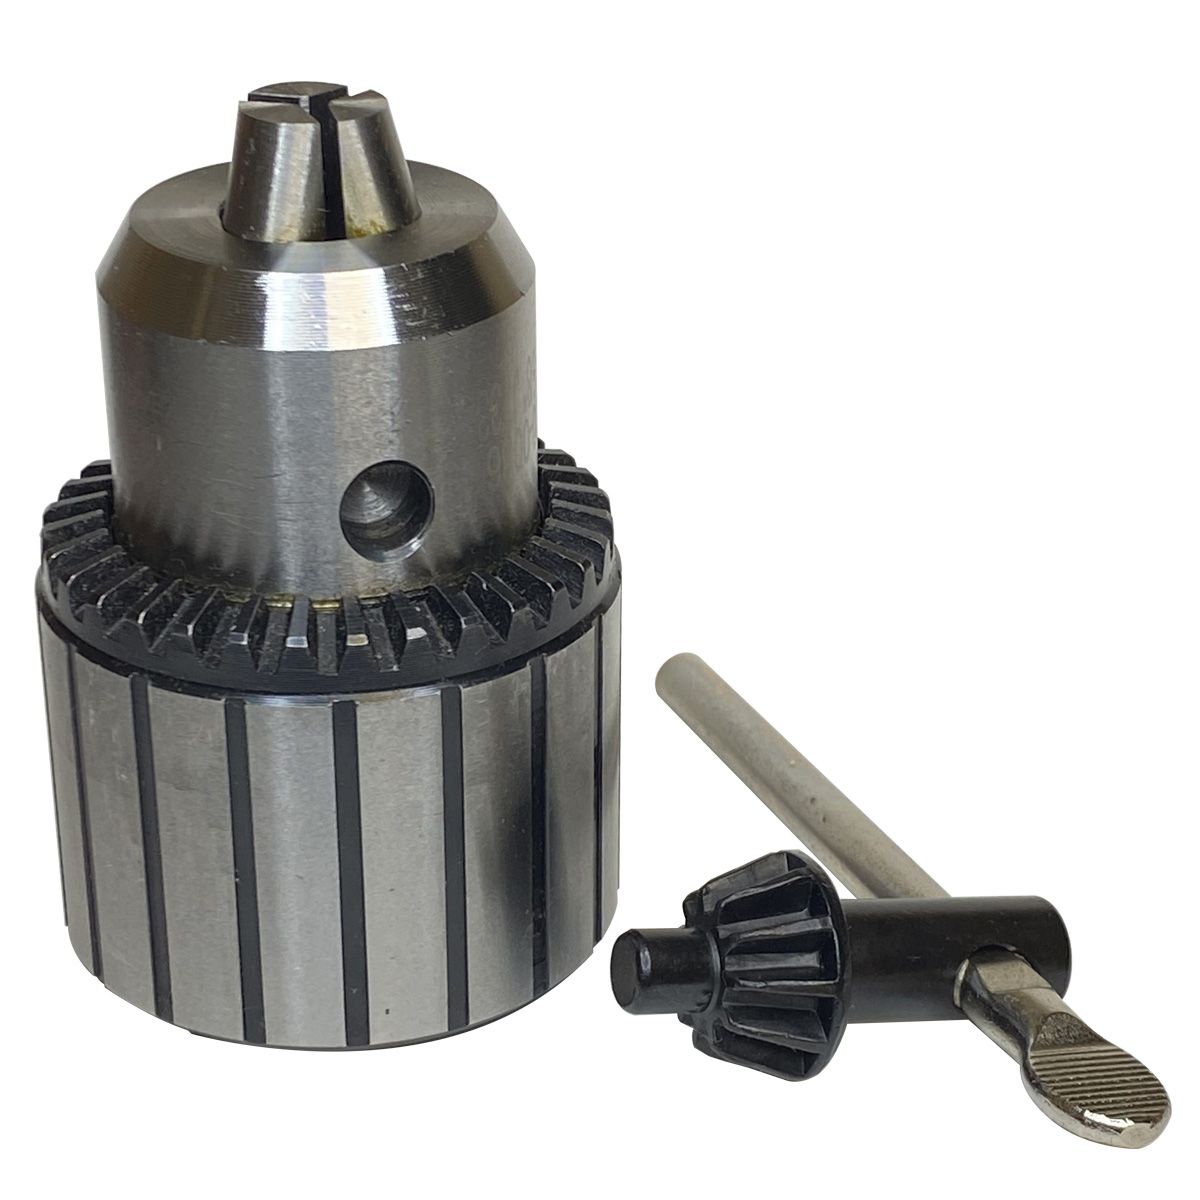 1/32-1/2" JT33 PRO QUALITY DRILL CHUCK WITH KEY (3700-0083)